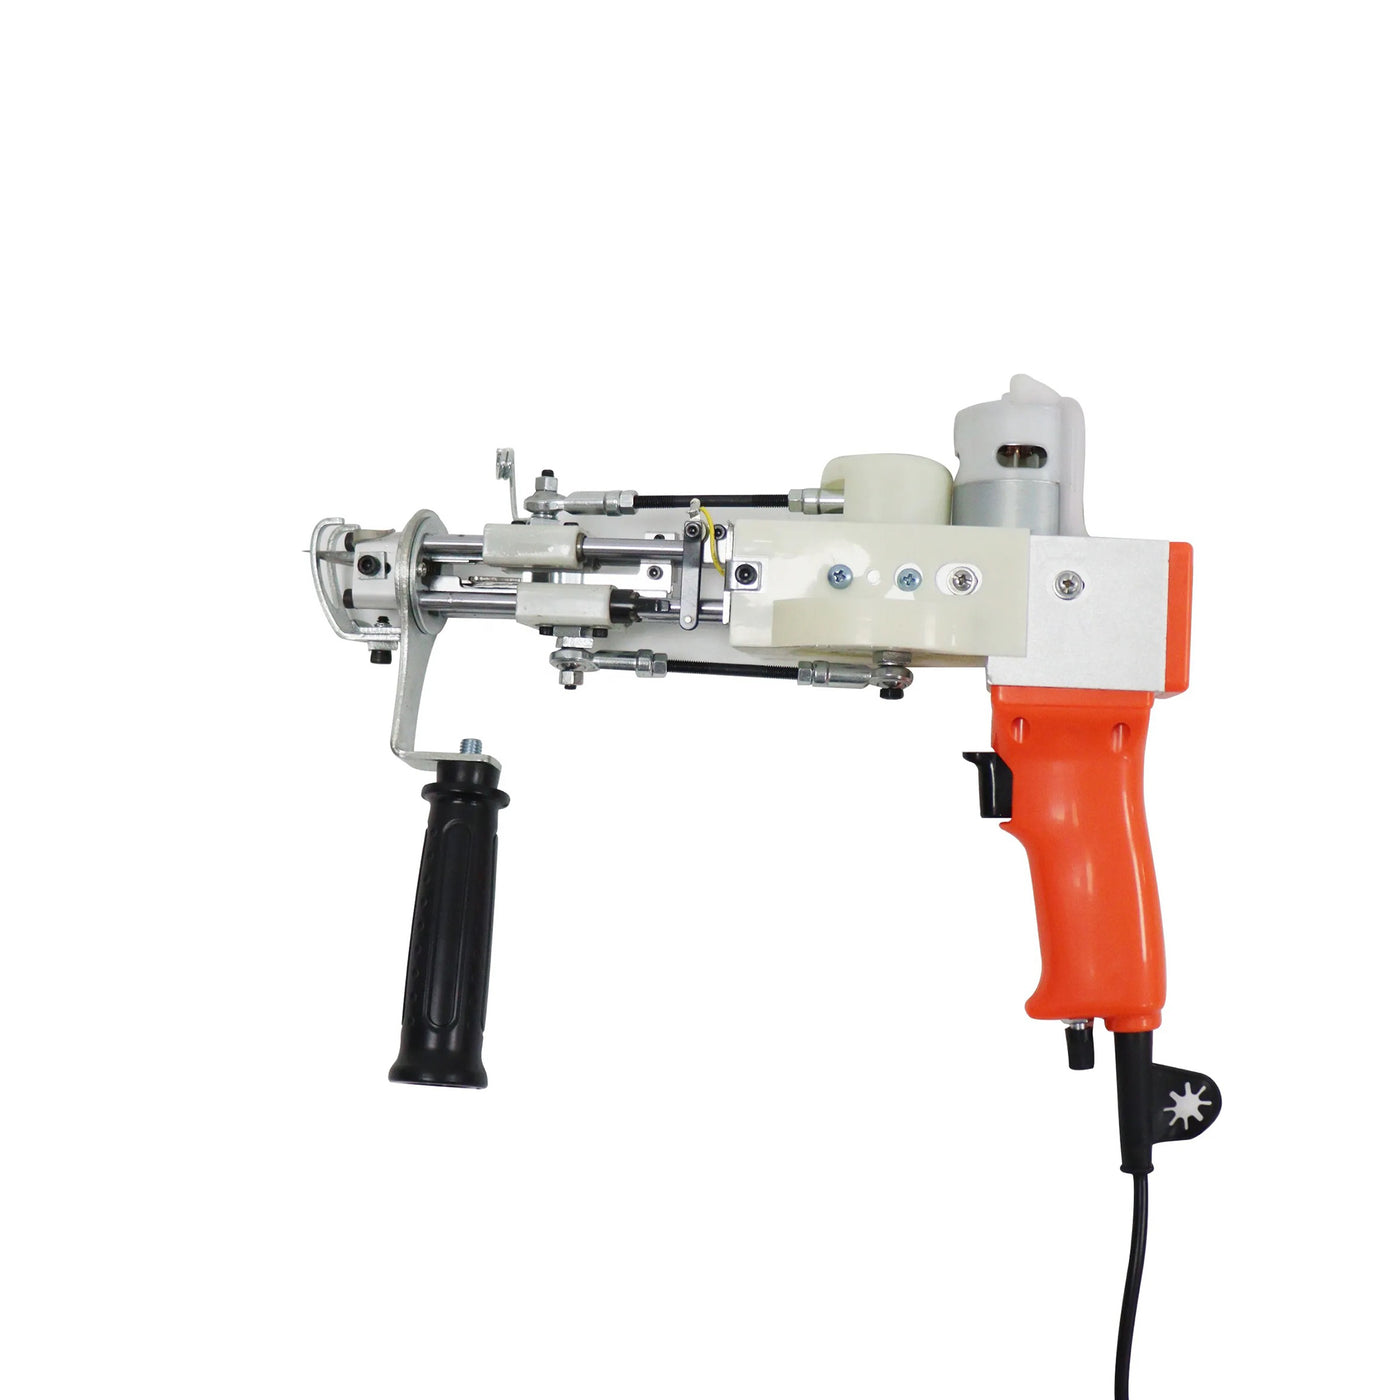 Authentic rug tufting gun with adjustable speed